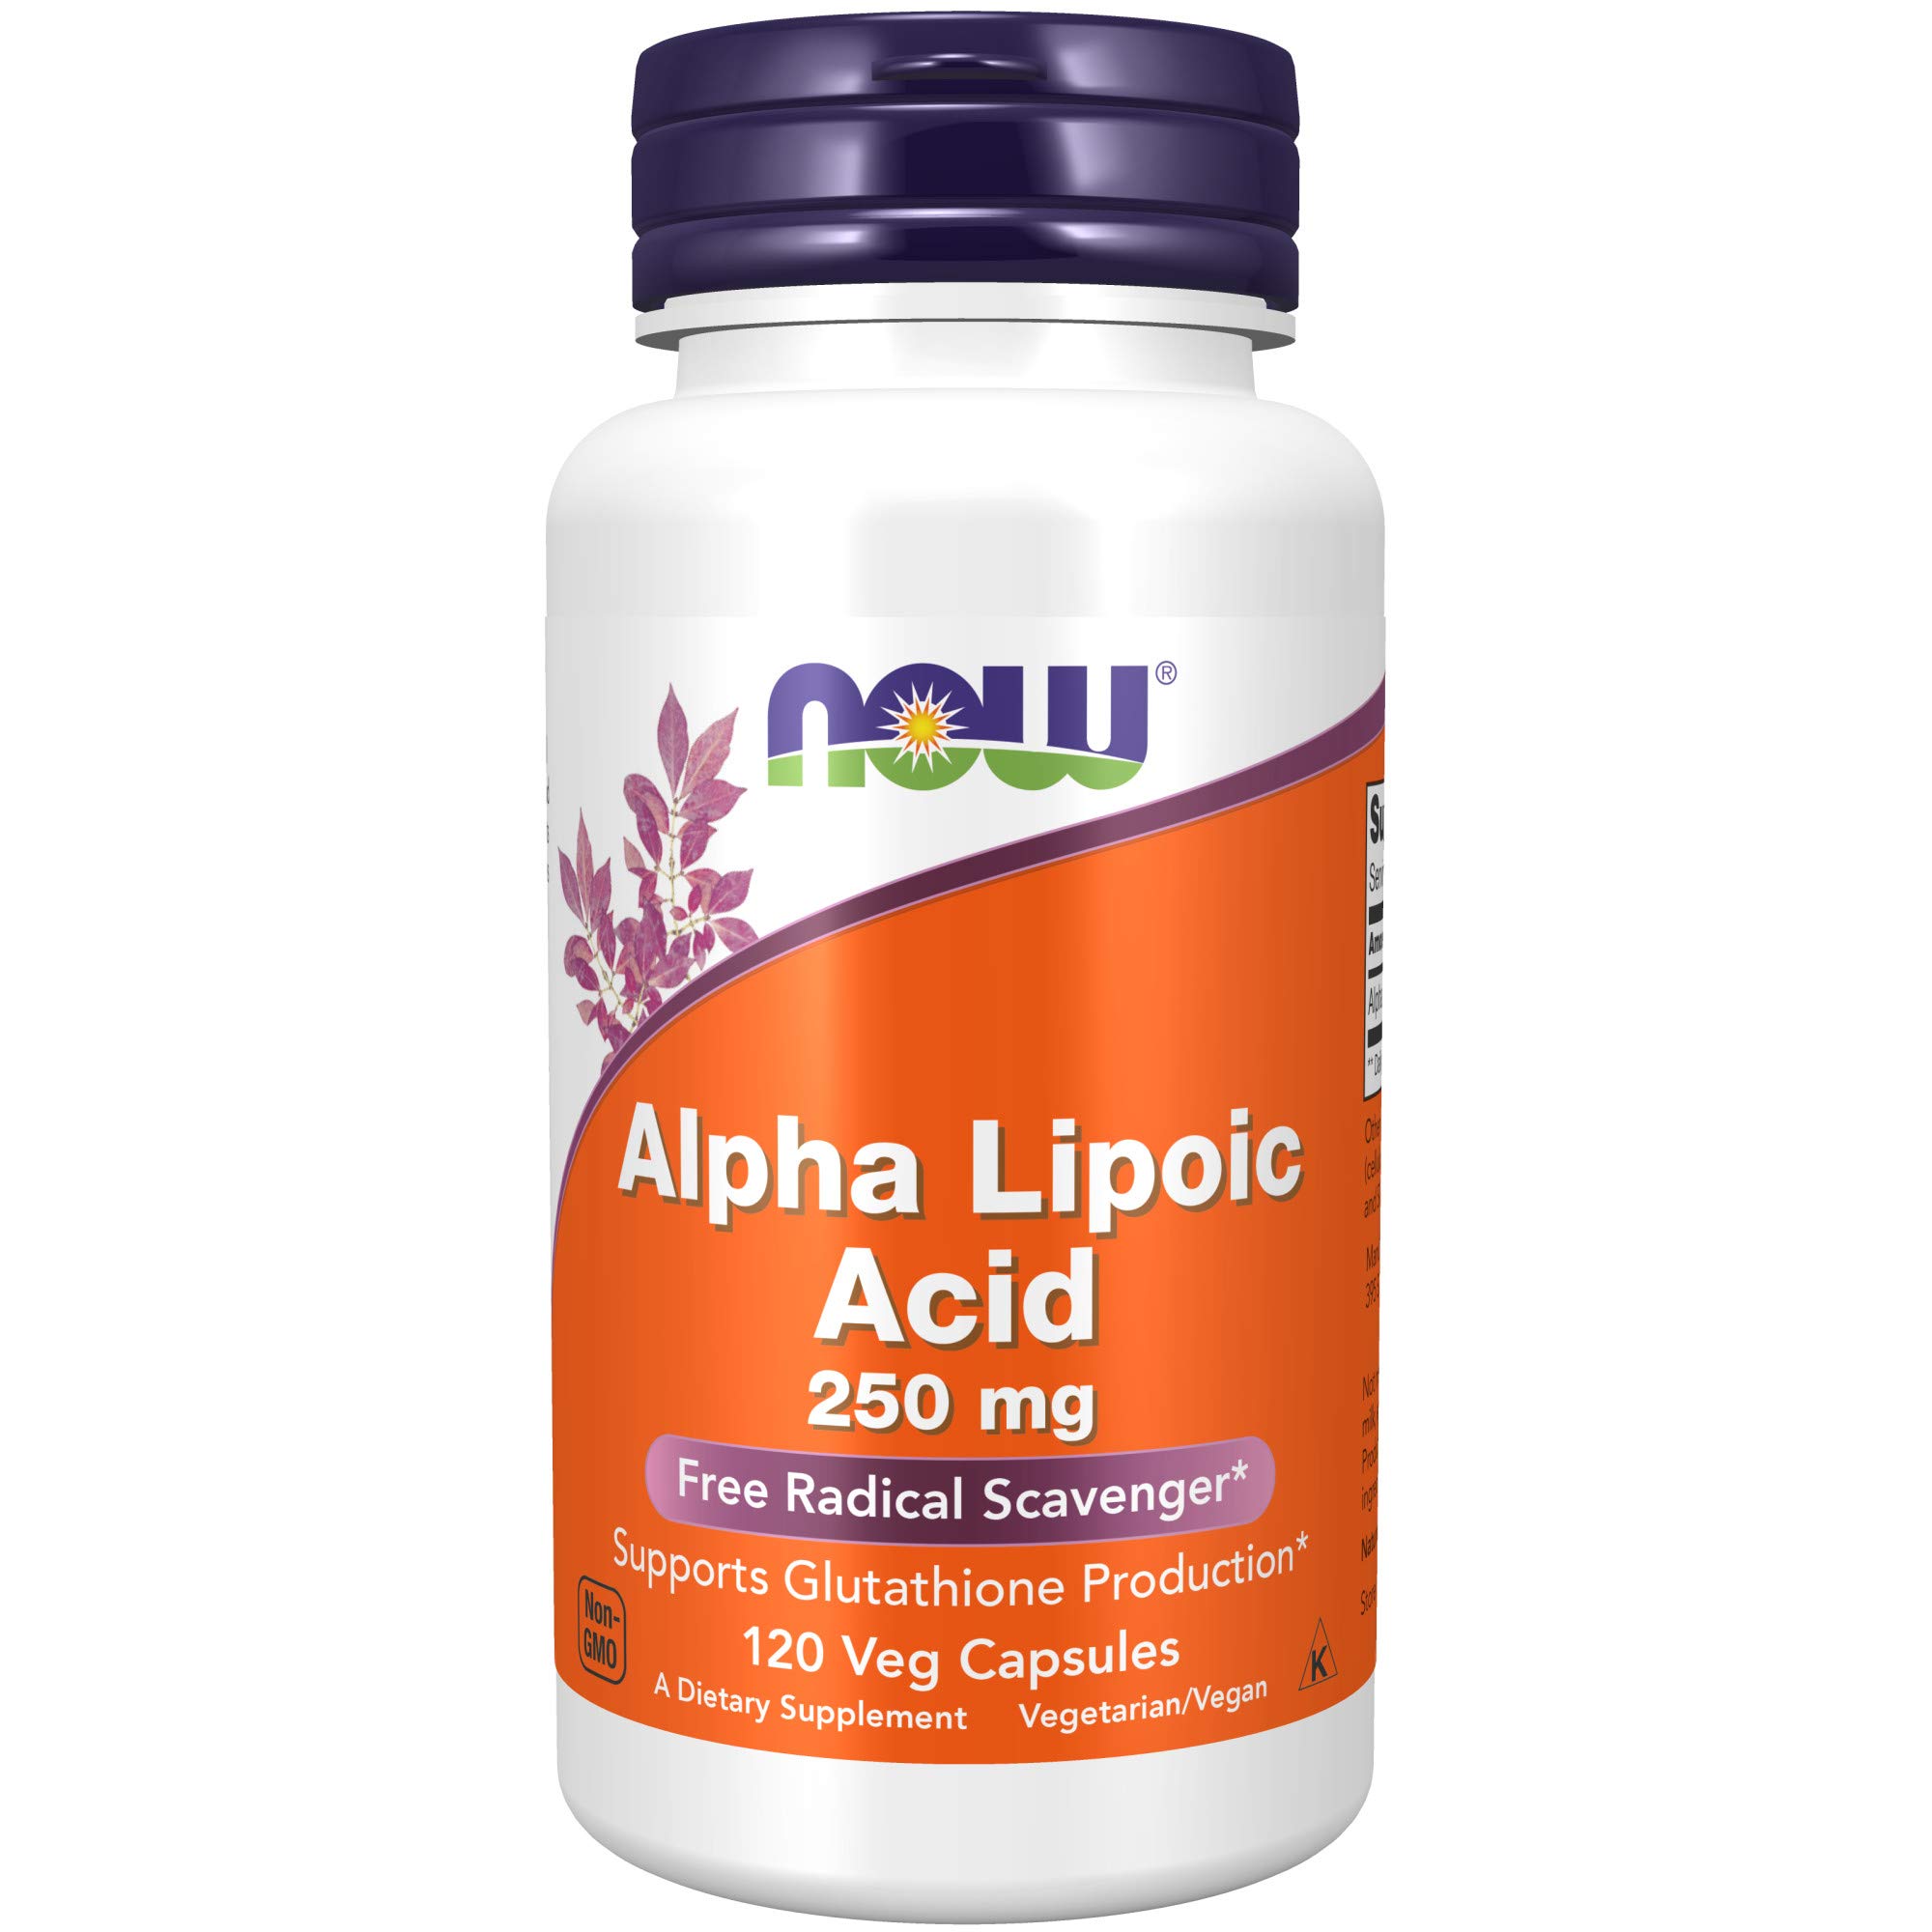 NOW Supplements, Alpha Lipoic Acid 250 mg, Supports Glutathione Production*, Free Radical Scavenger*, 120 Veg Capsules